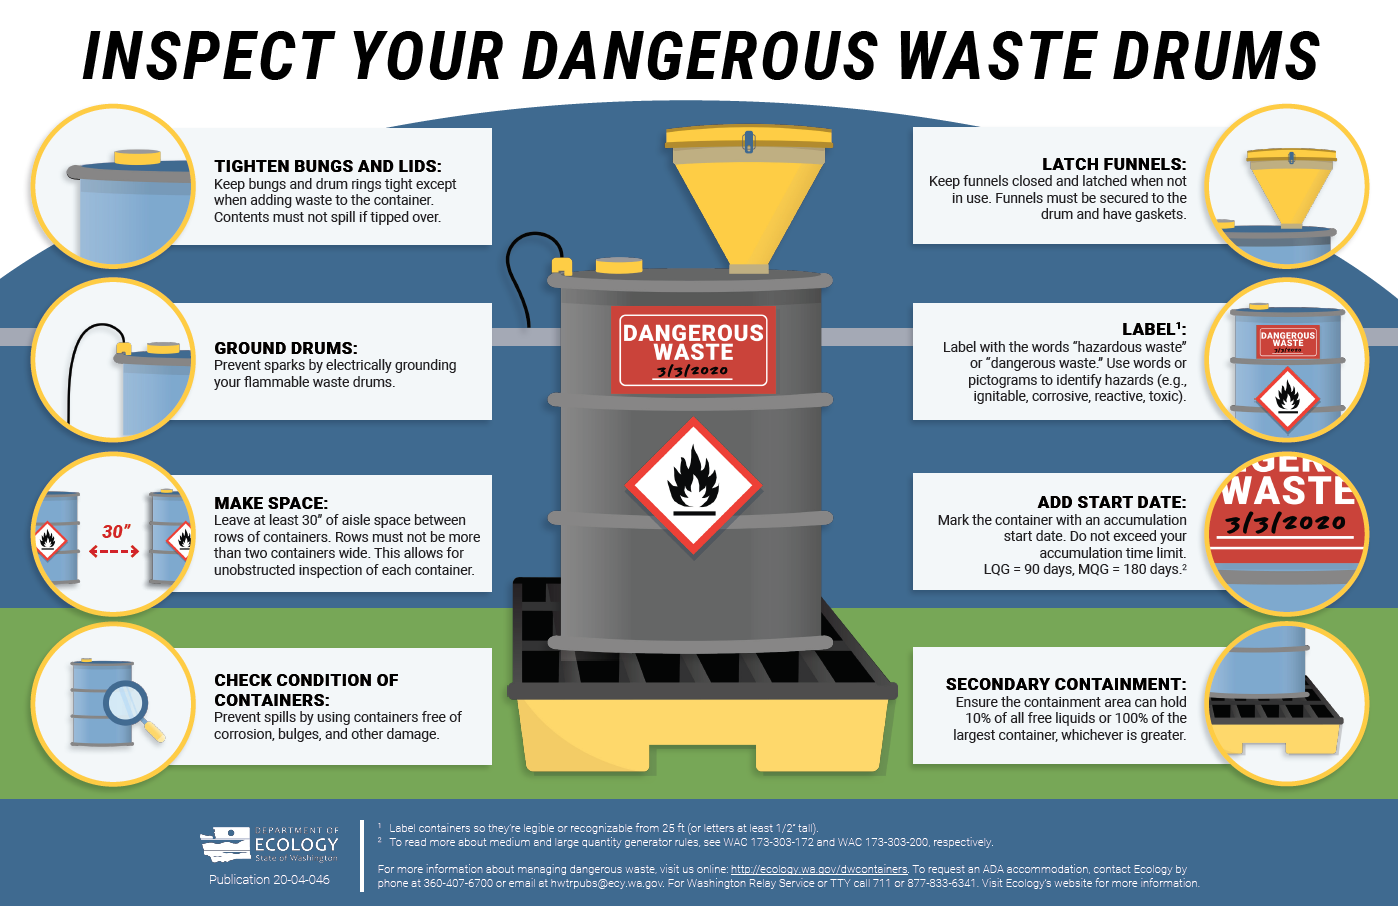 Inspect your dangerous waste drums